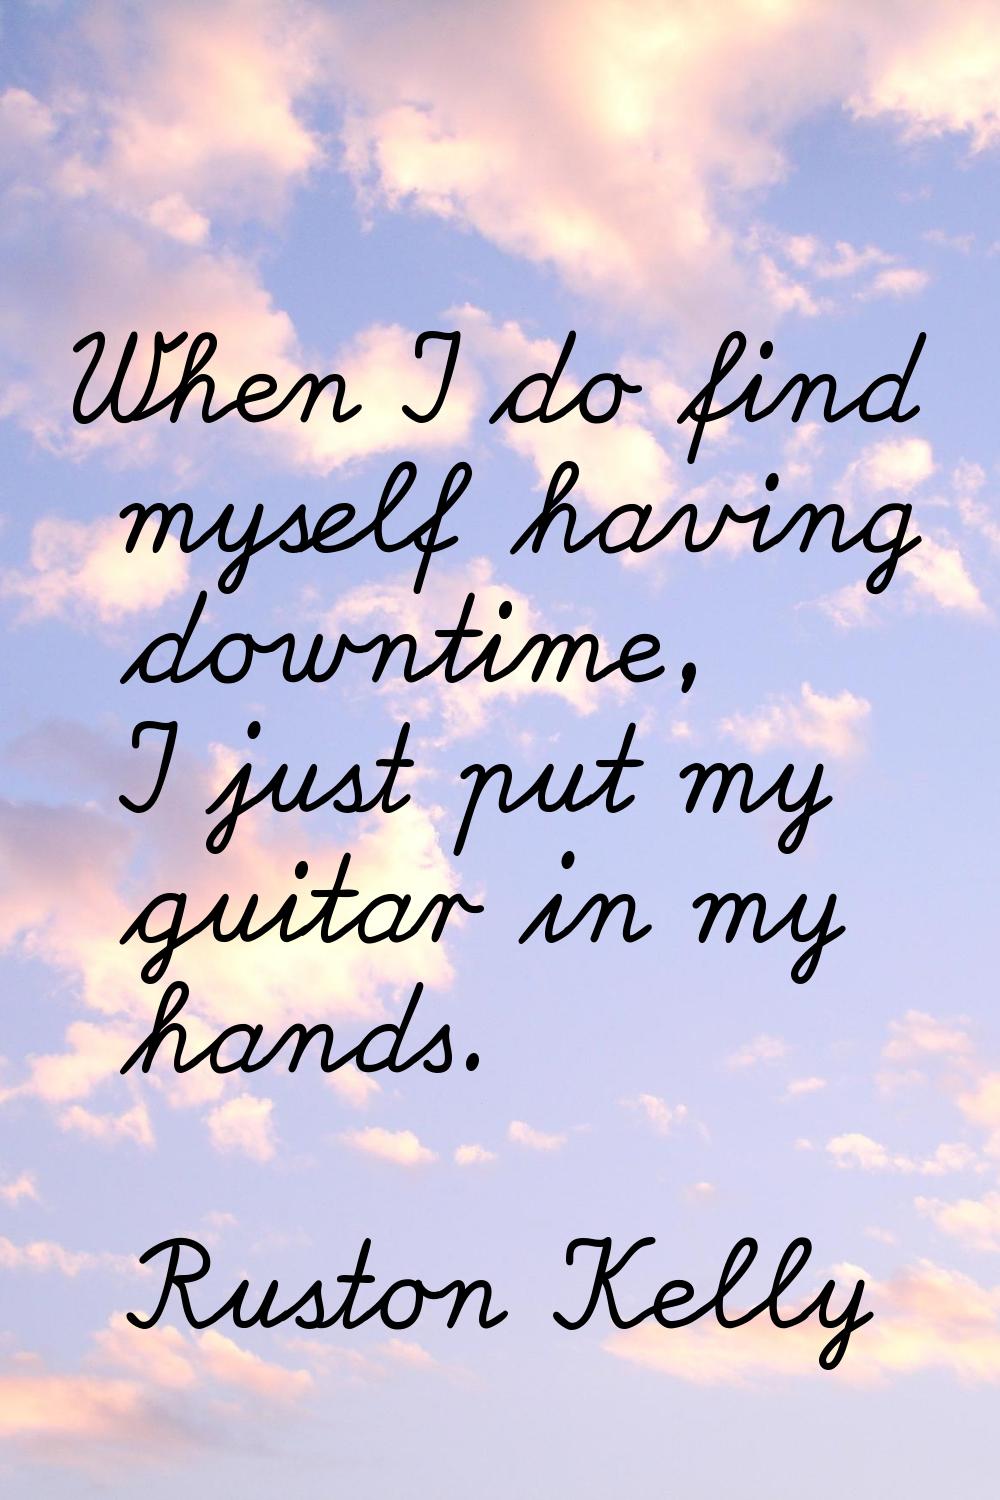 When I do find myself having downtime, I just put my guitar in my hands.